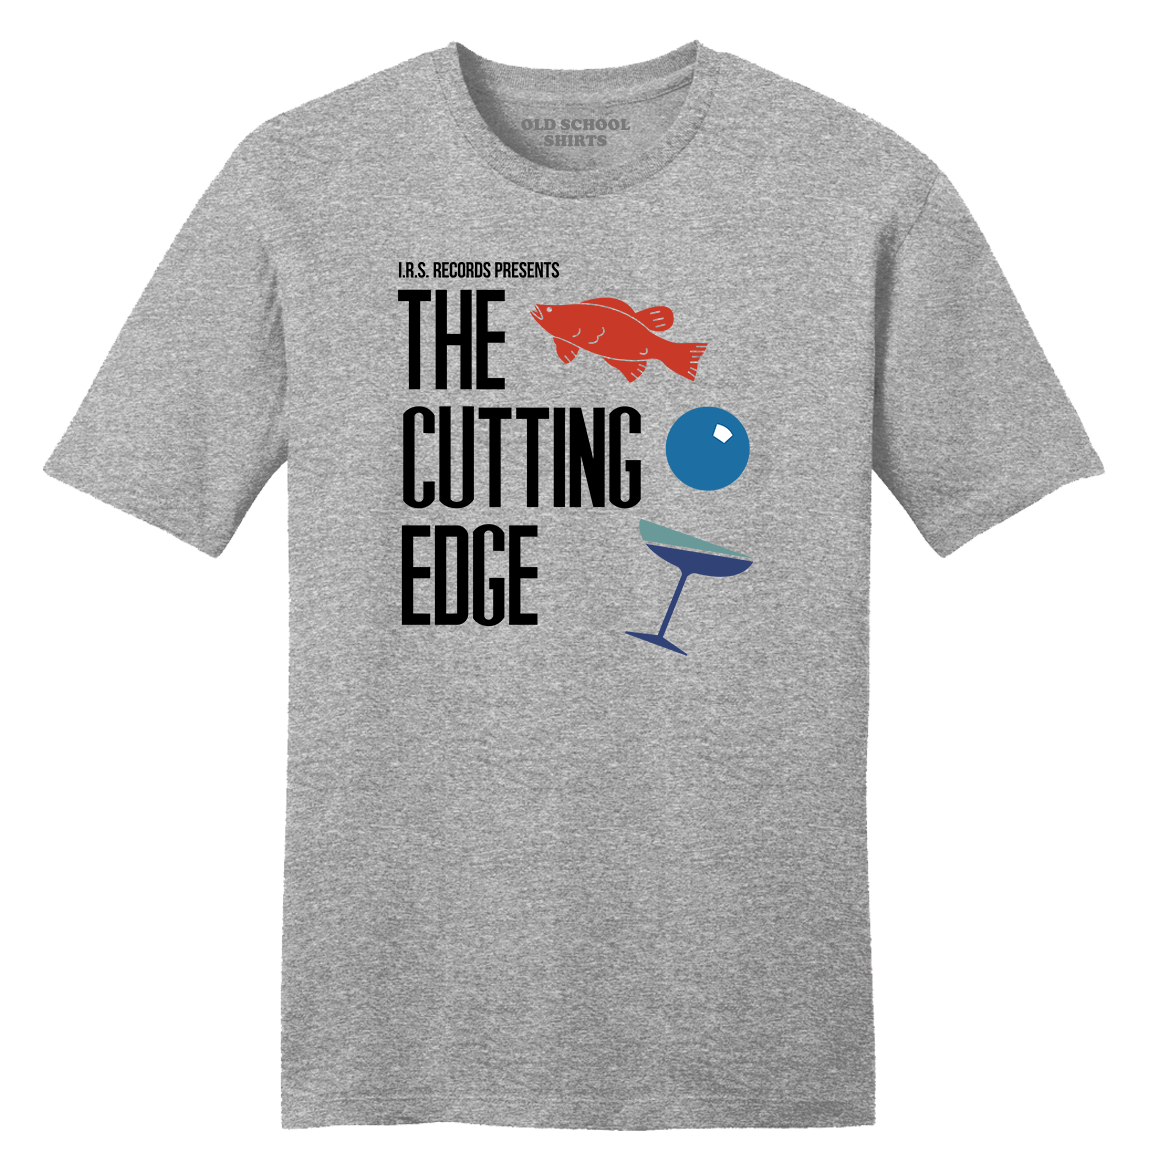 I.R.S. Records Presents The Cutting Edge